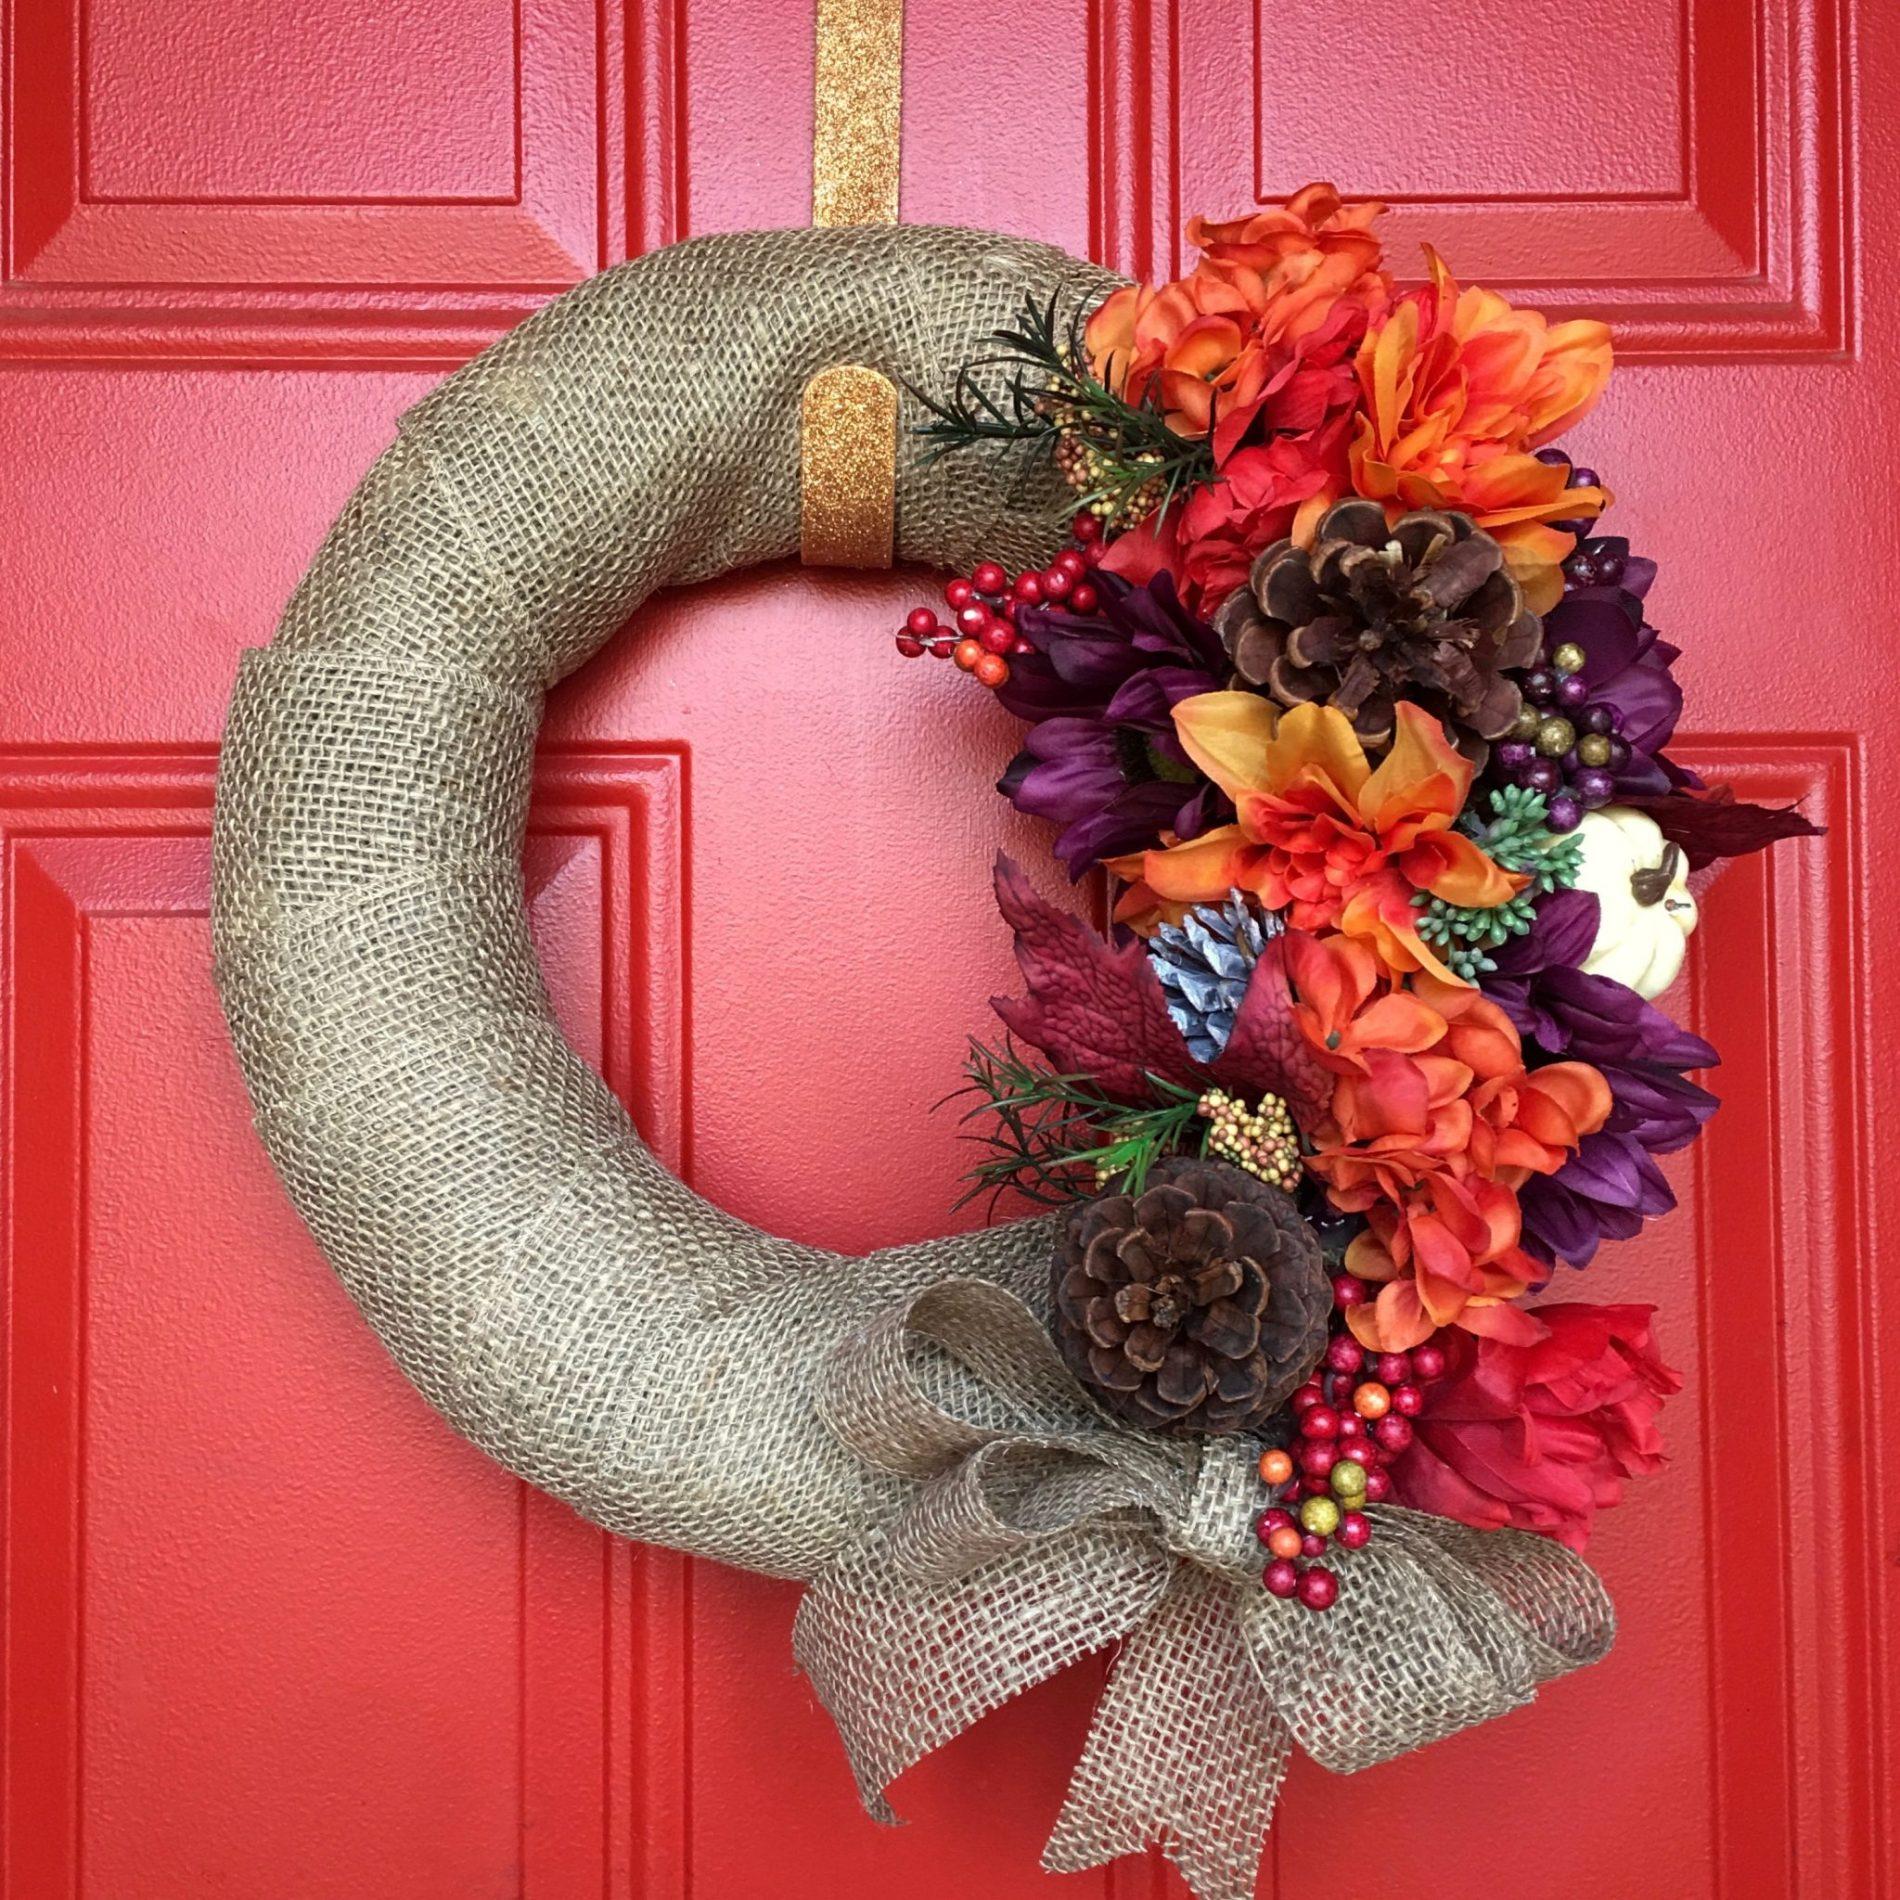 Adults & Crafts Review – Autumn Wreath – September 2018